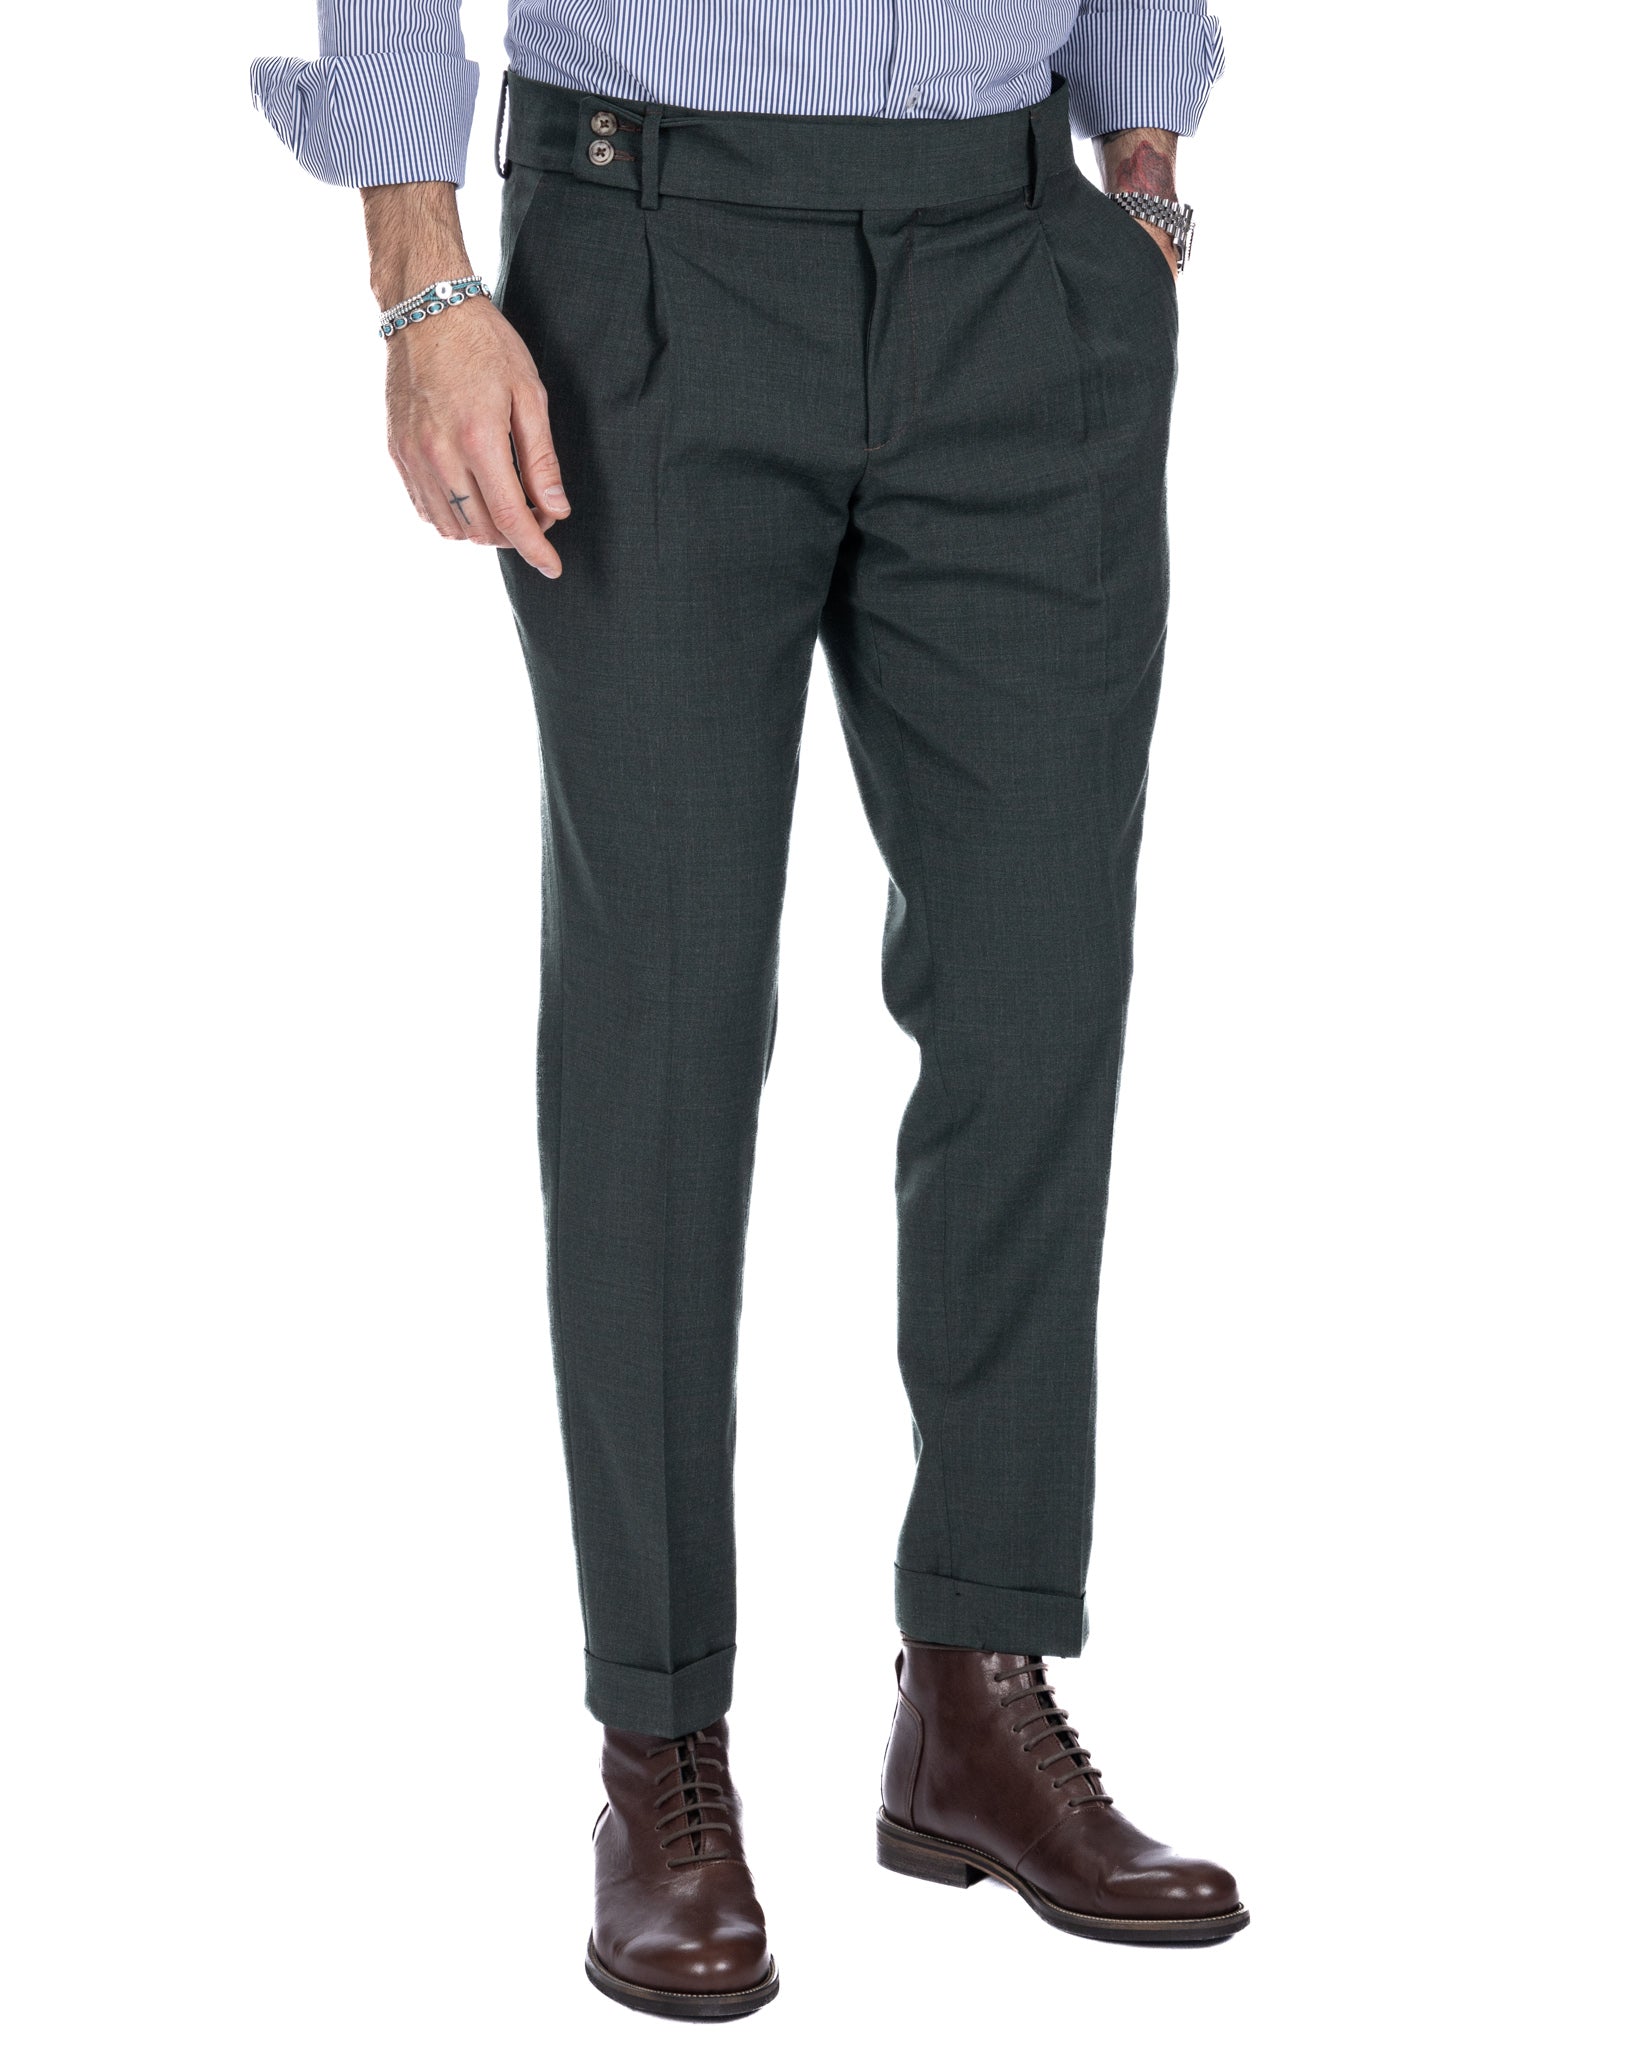 Italian - high-waisted military trousers in wool blend